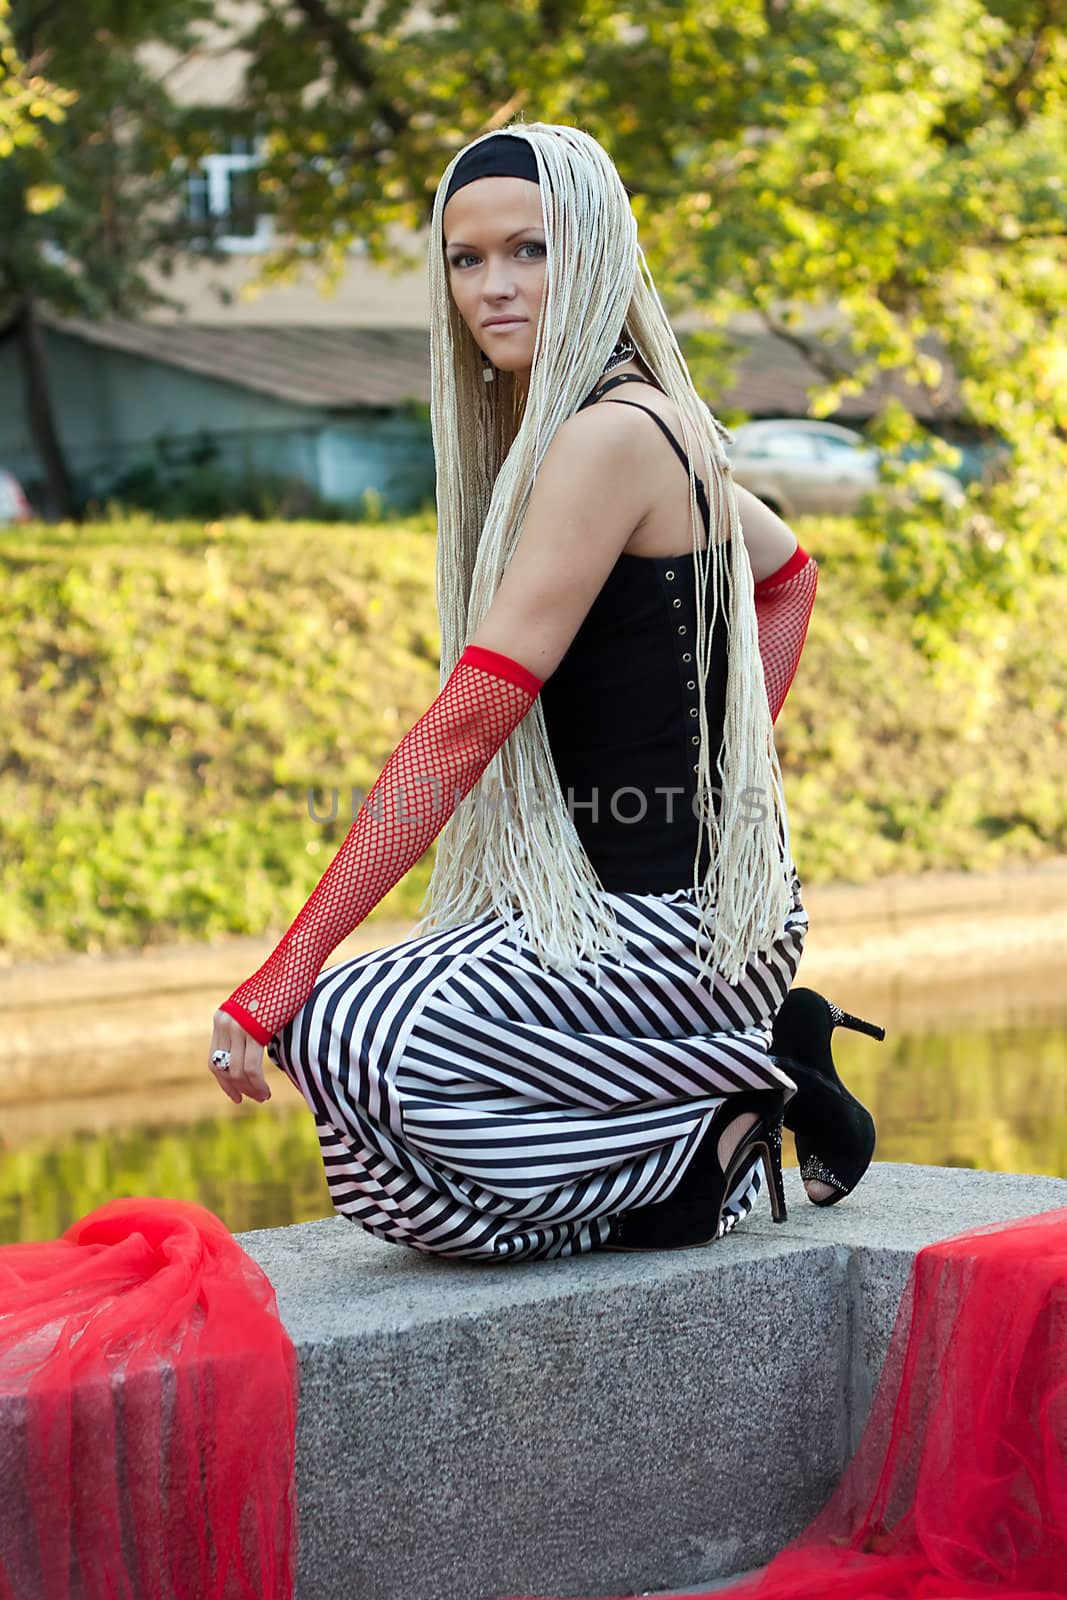 Young woman with braided seating near the river. On her hands are red gloves